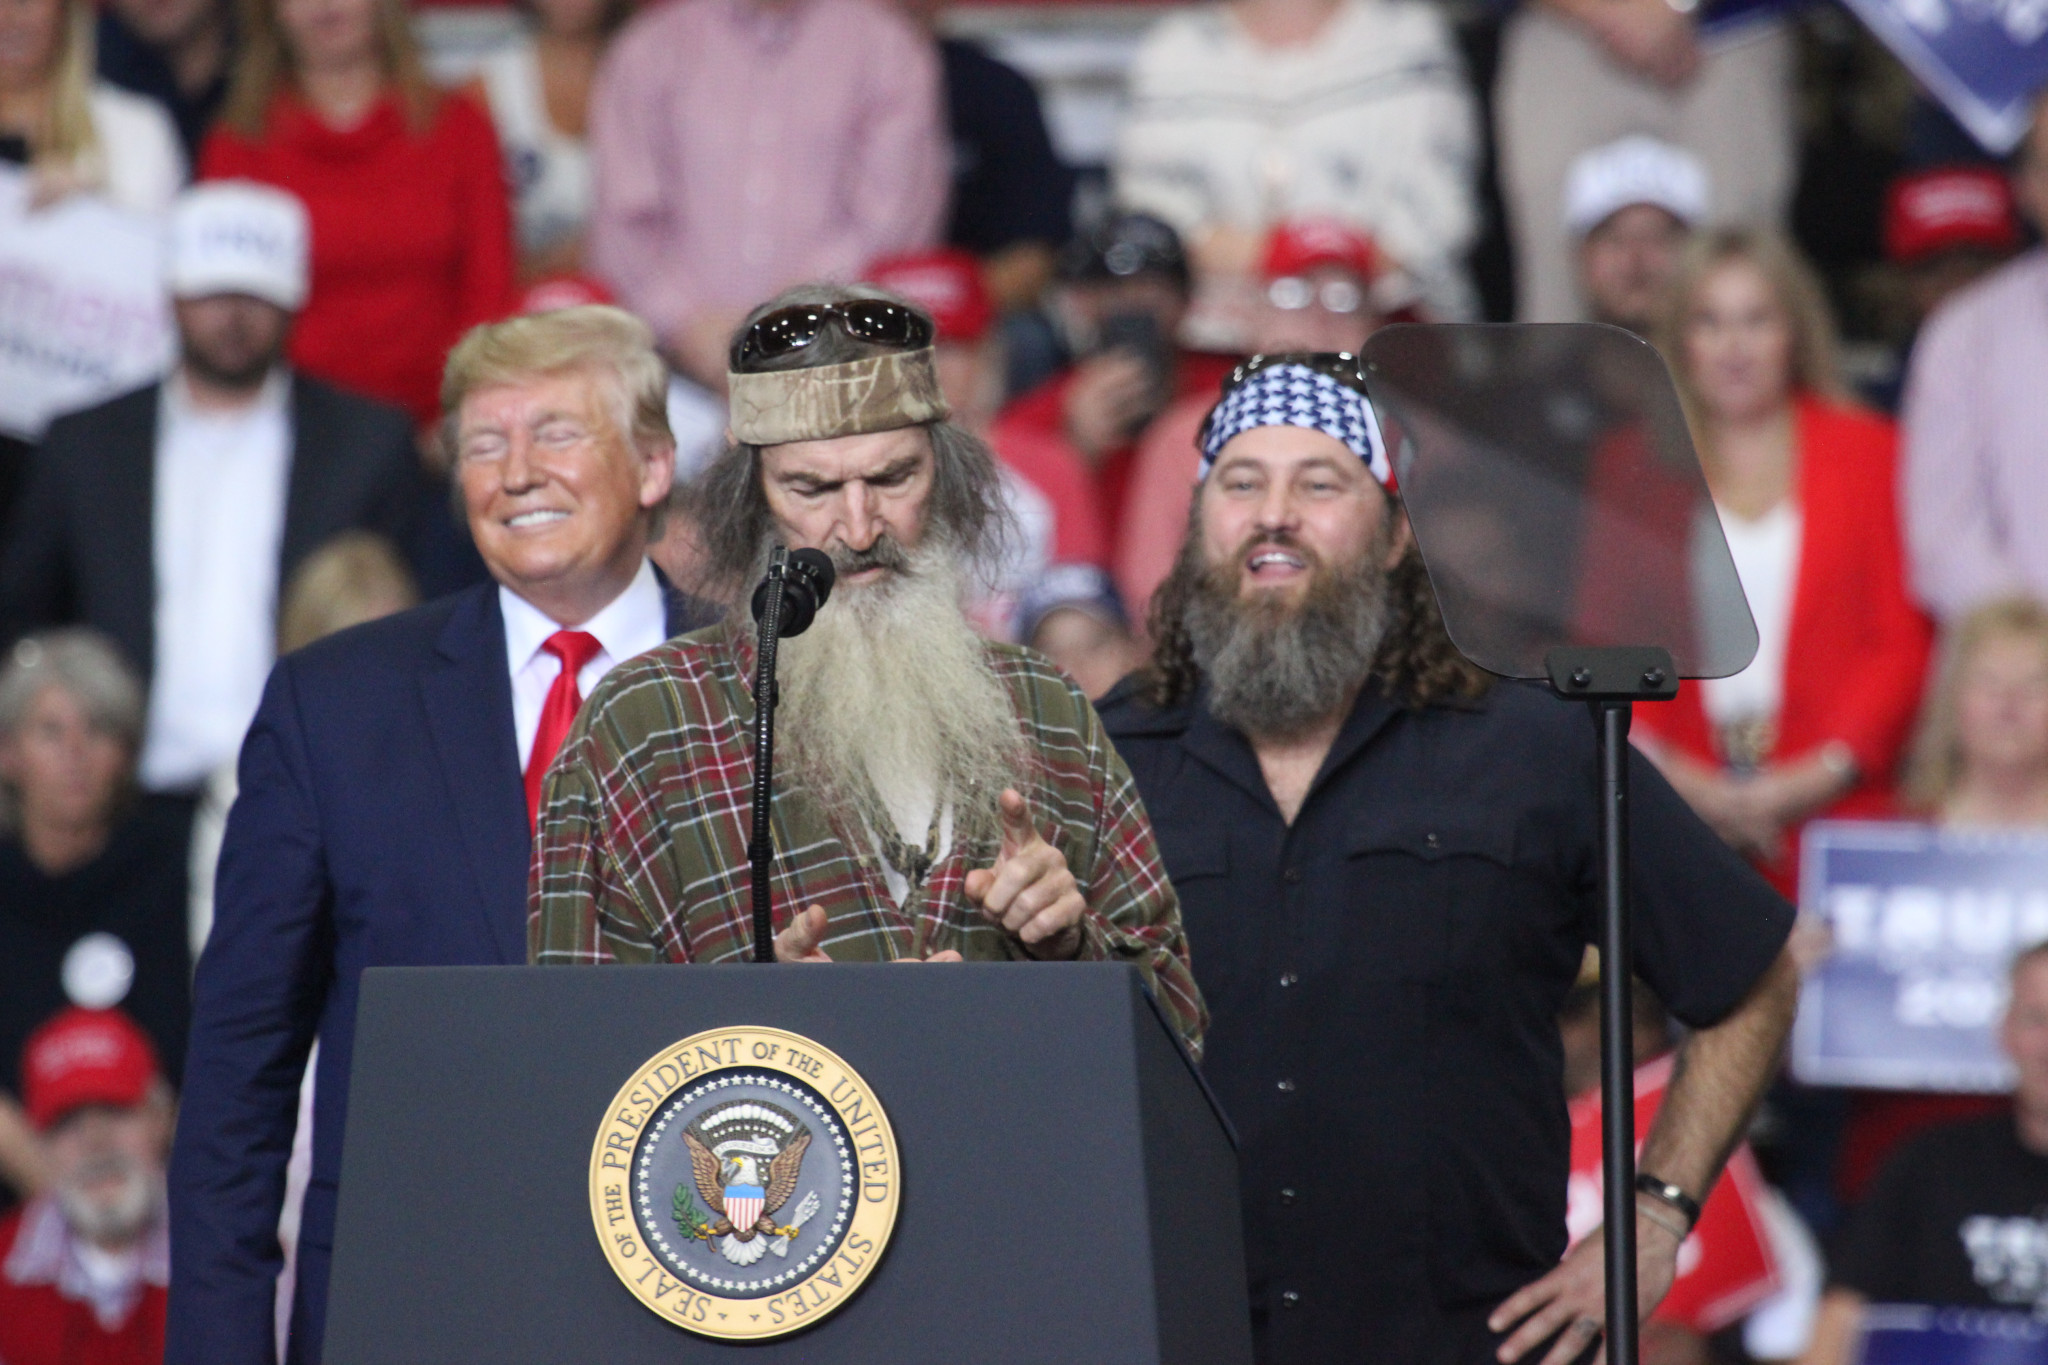 "Duck Dynasty" star Phil Robertson counts on his fingers the reasons he supports Trump